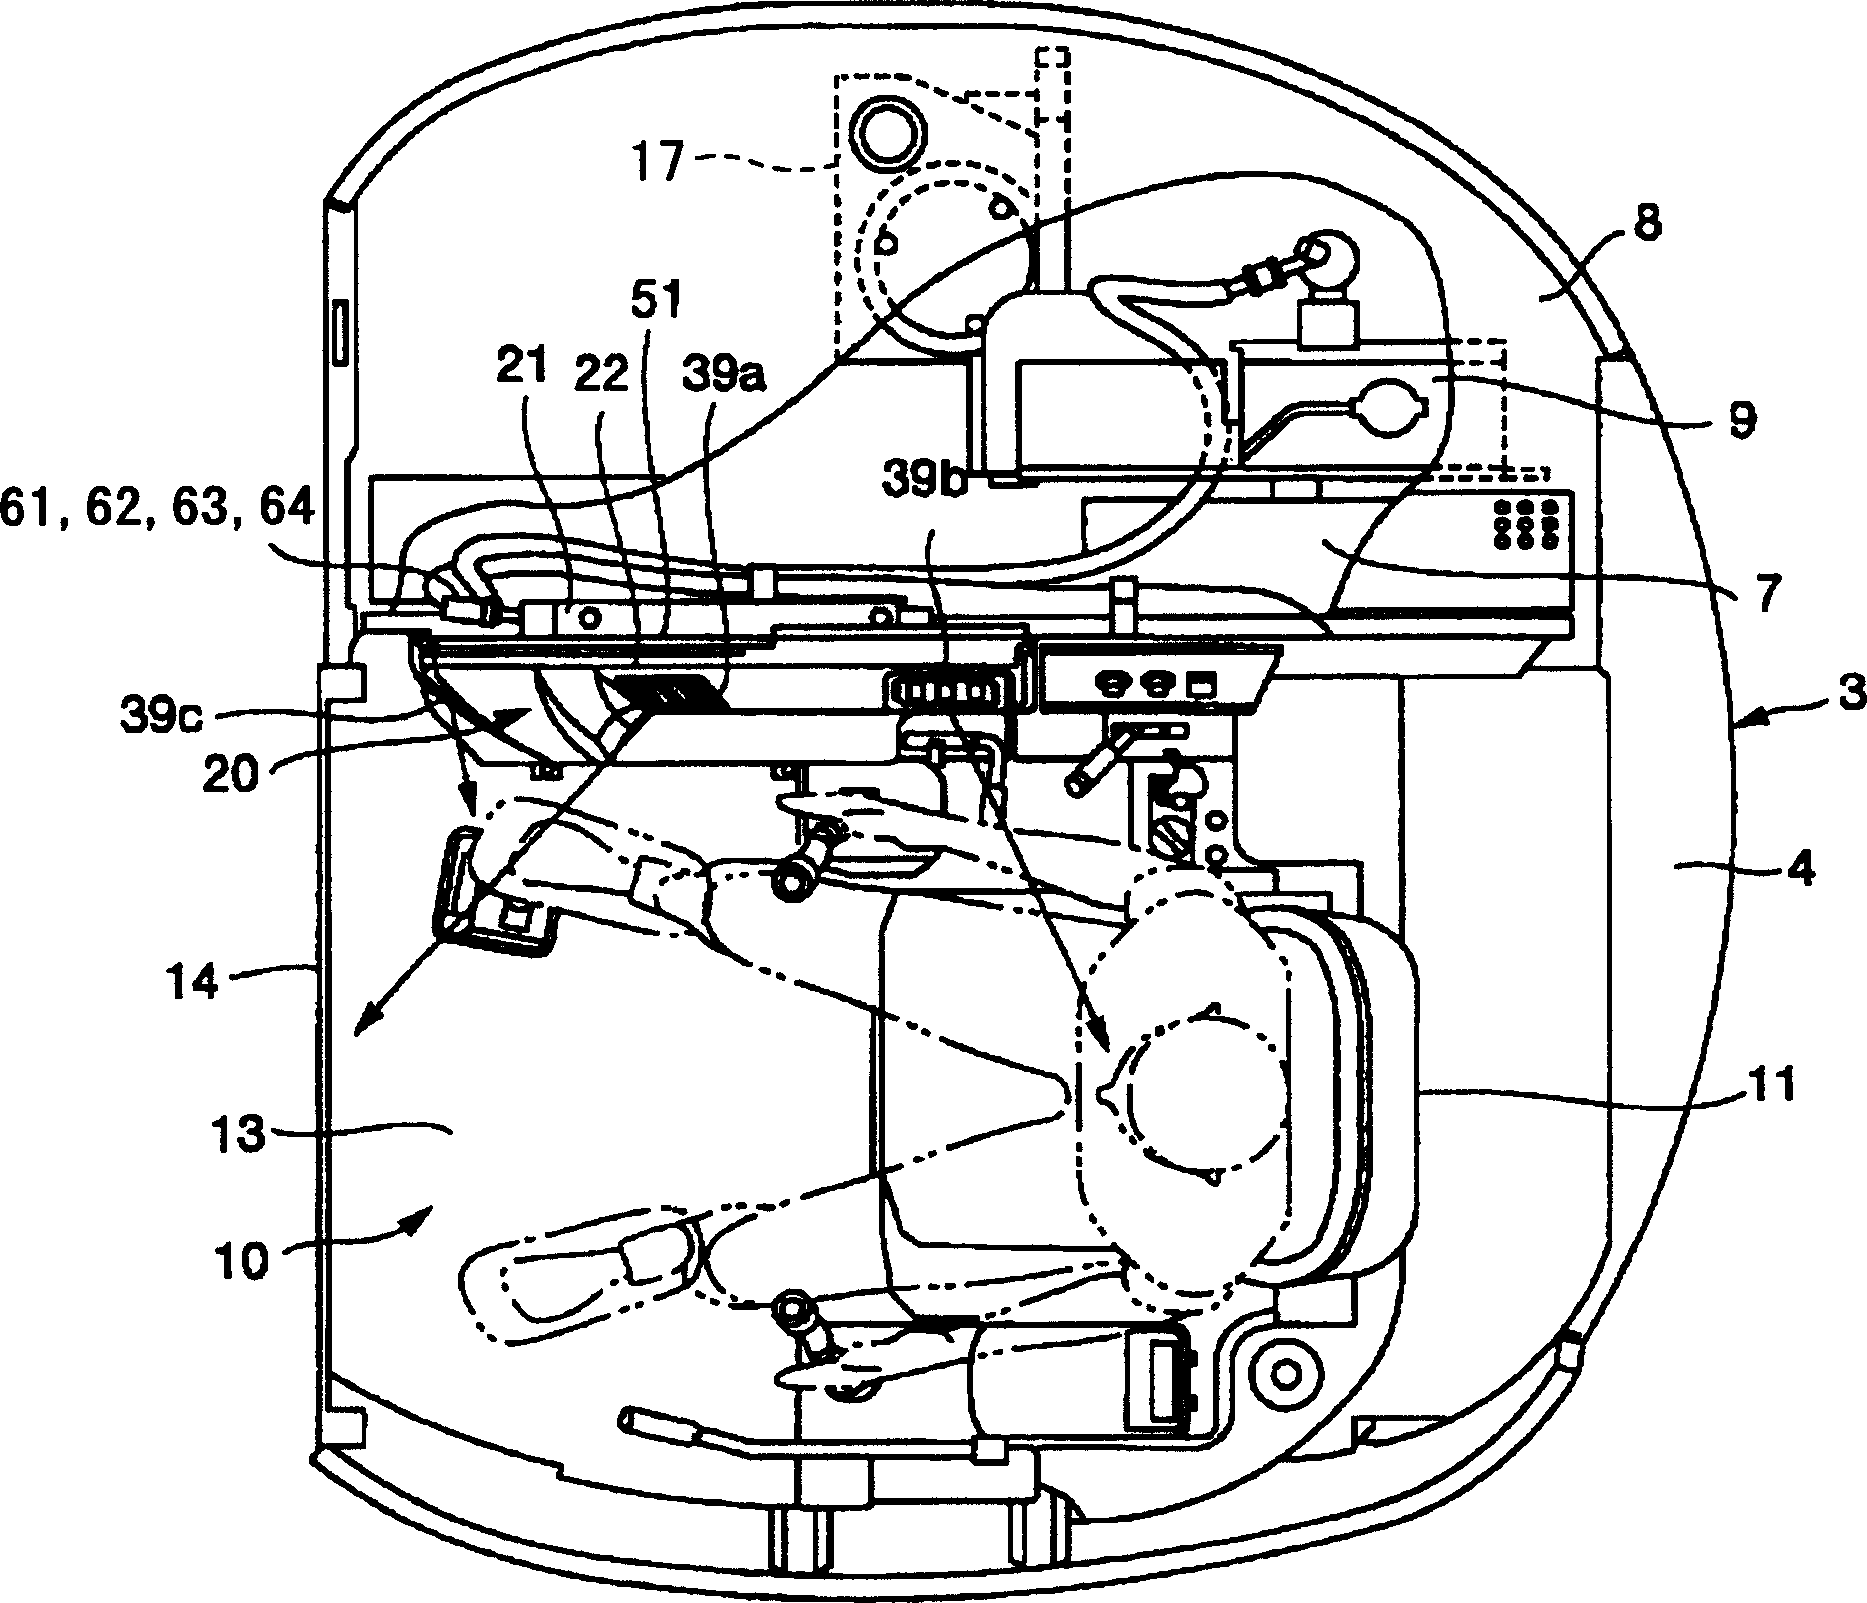 Air conditoning device of oil pressure digger